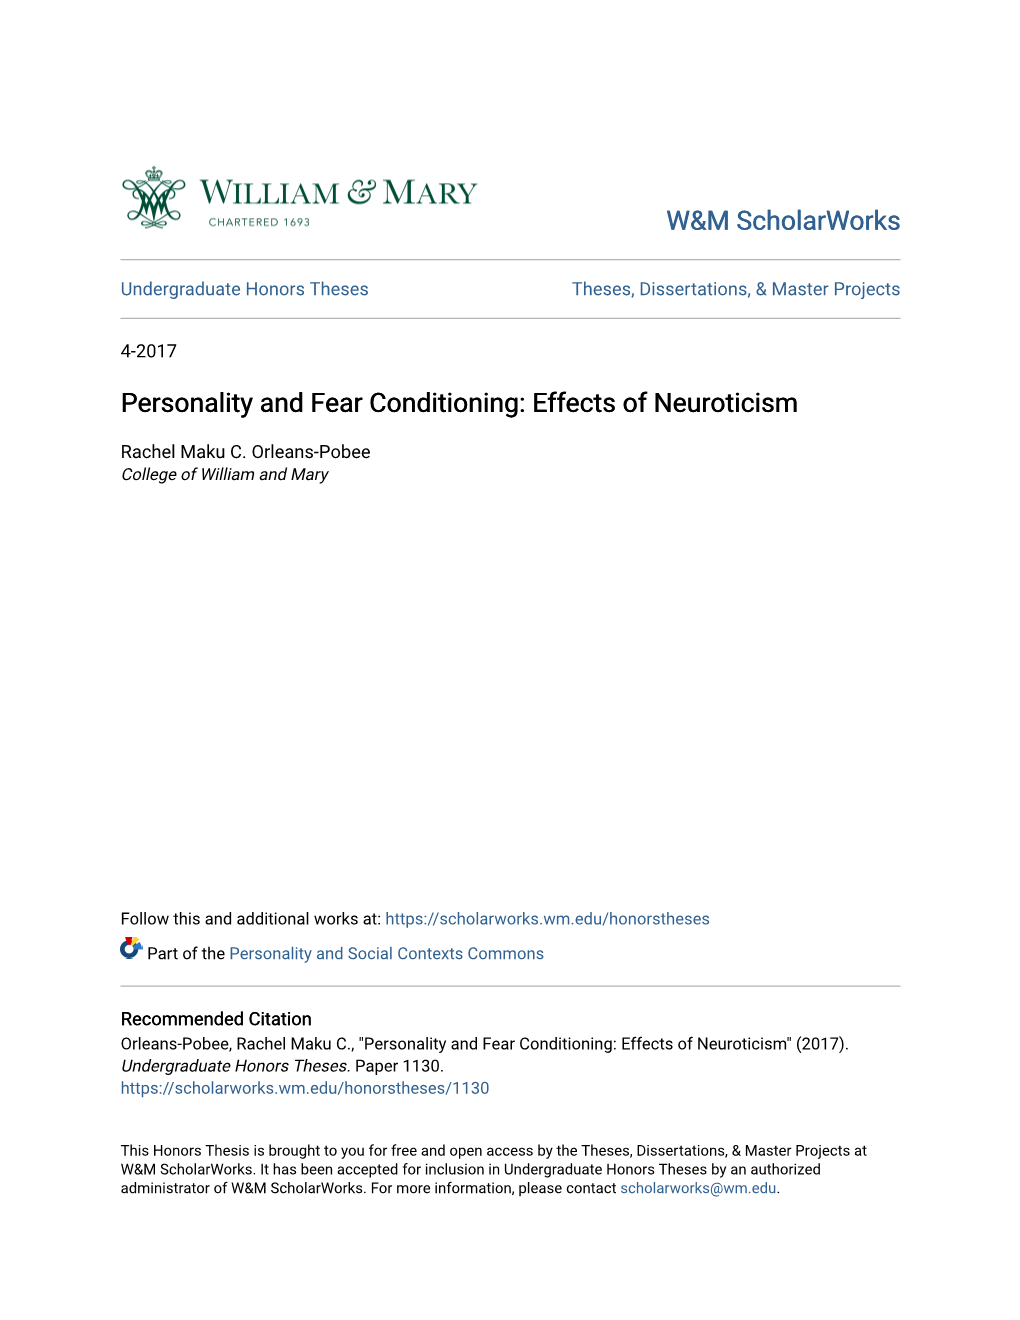 Personality and Fear Conditioning: Effects of Neuroticism